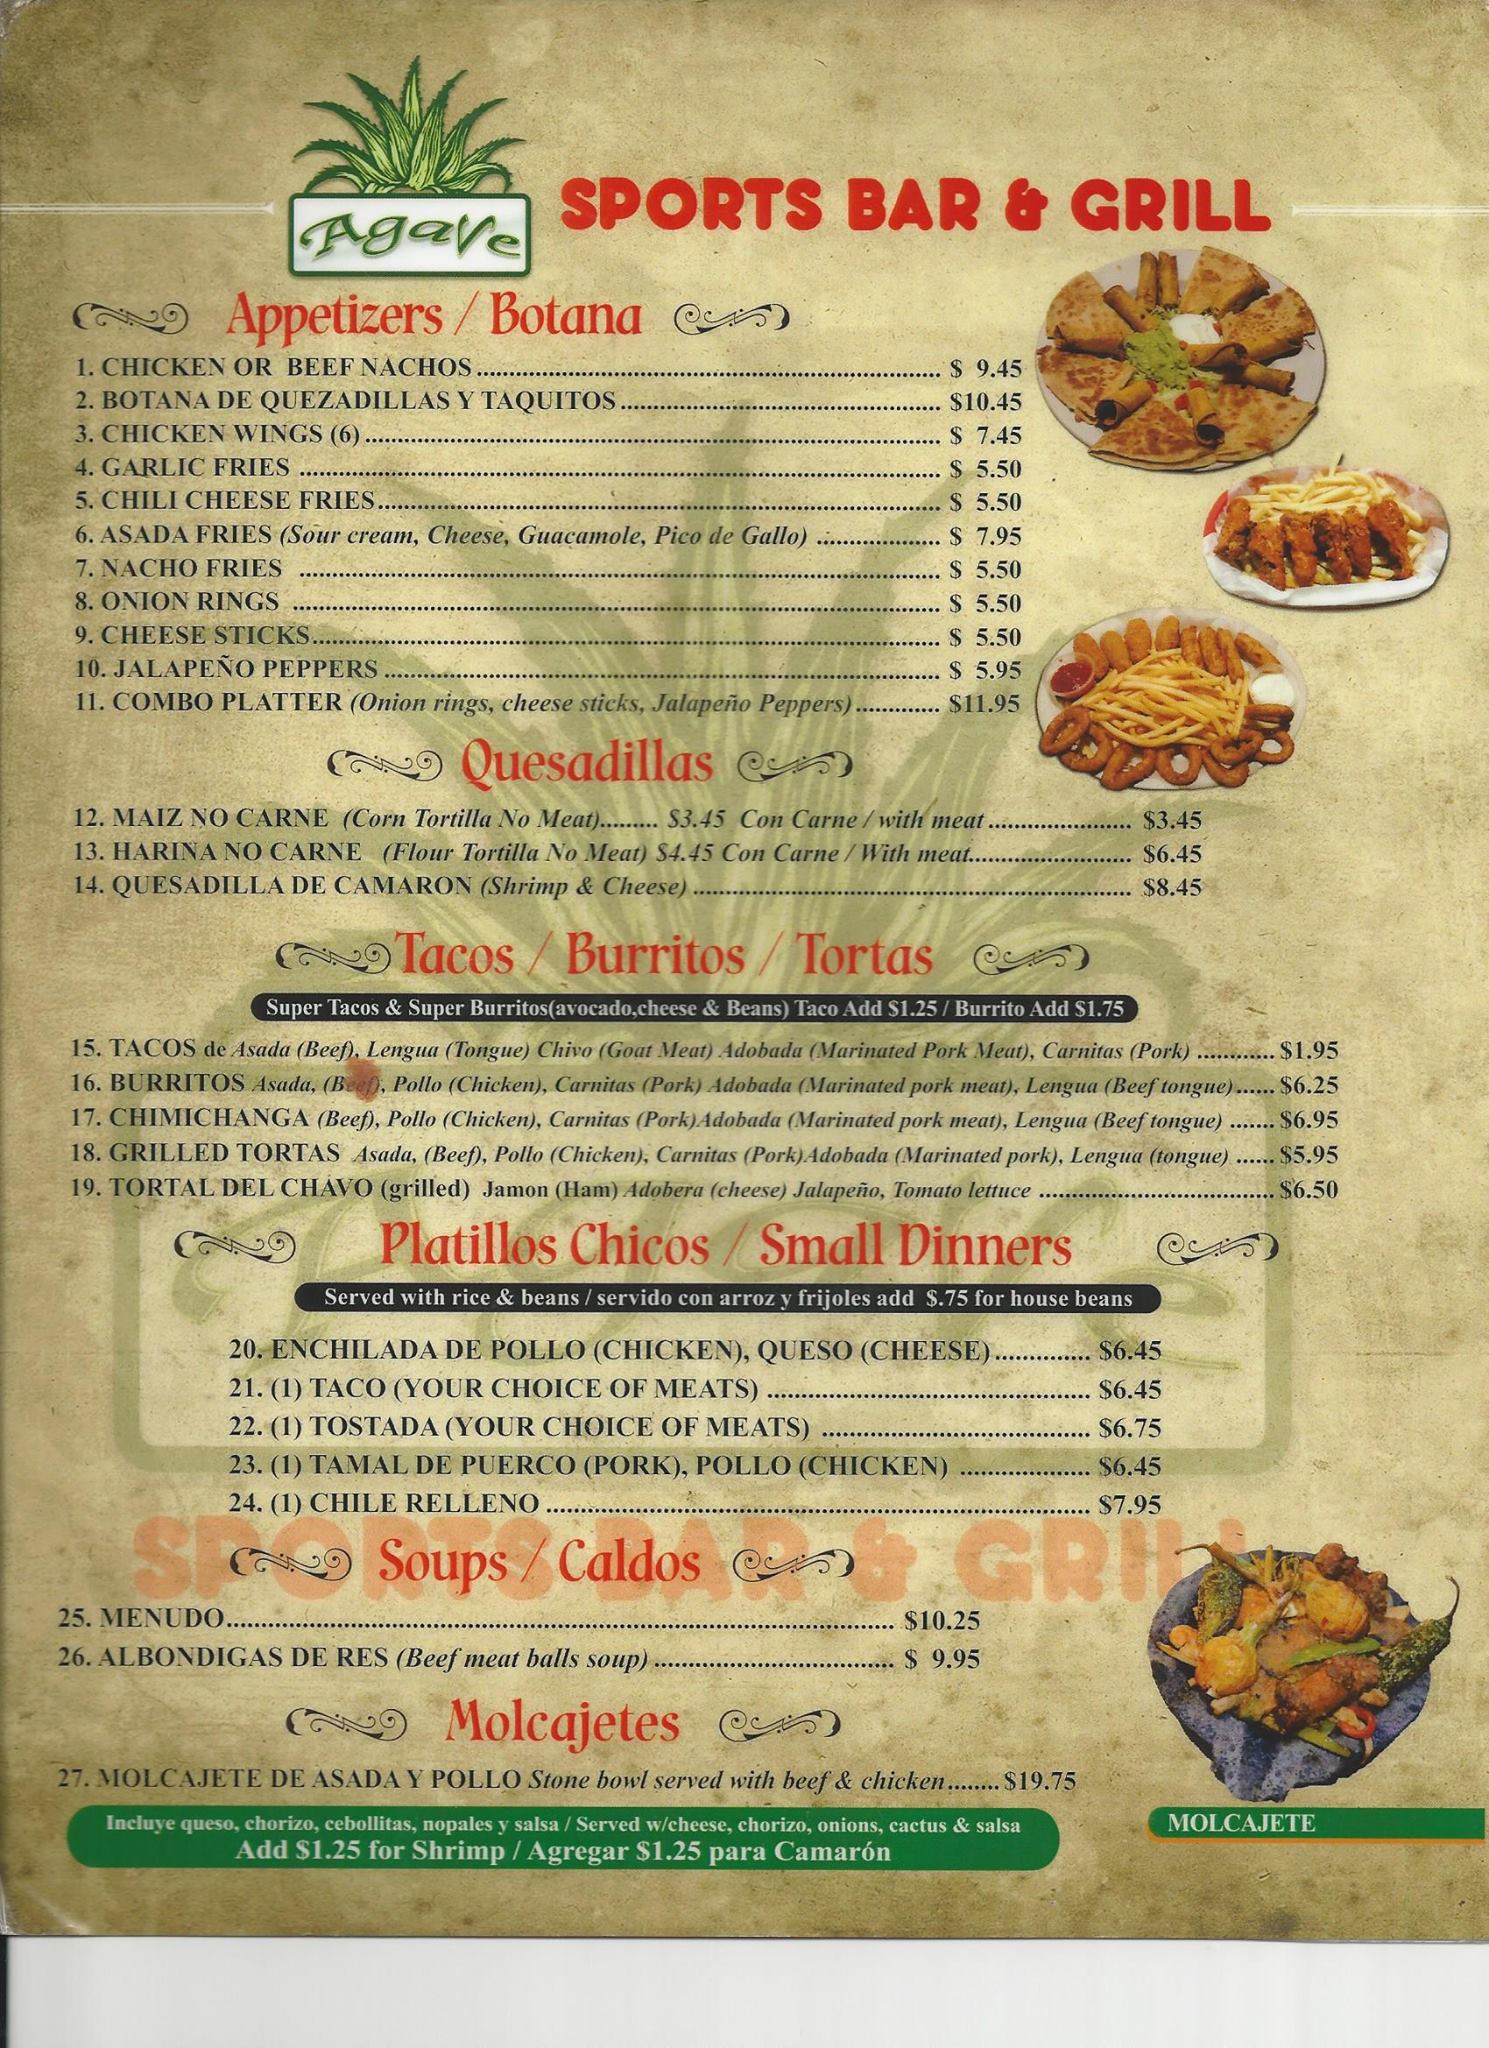 Agave Sports Bar And Grill General Menu